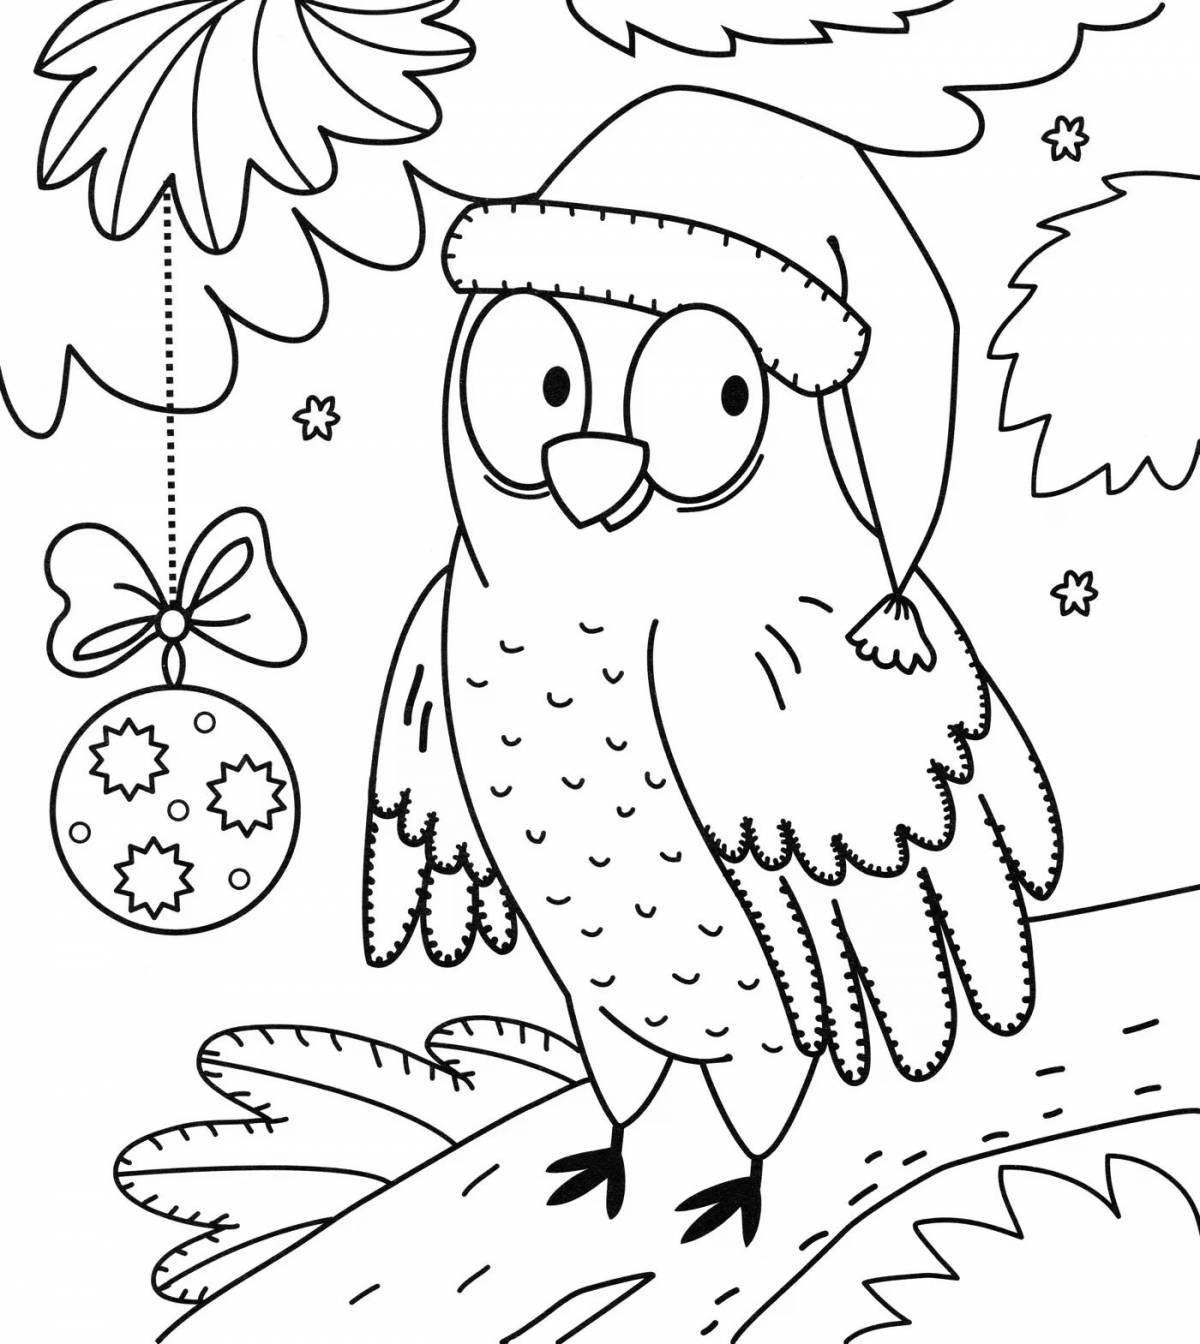 Playful Christmas coloring book for 5-6 year olds